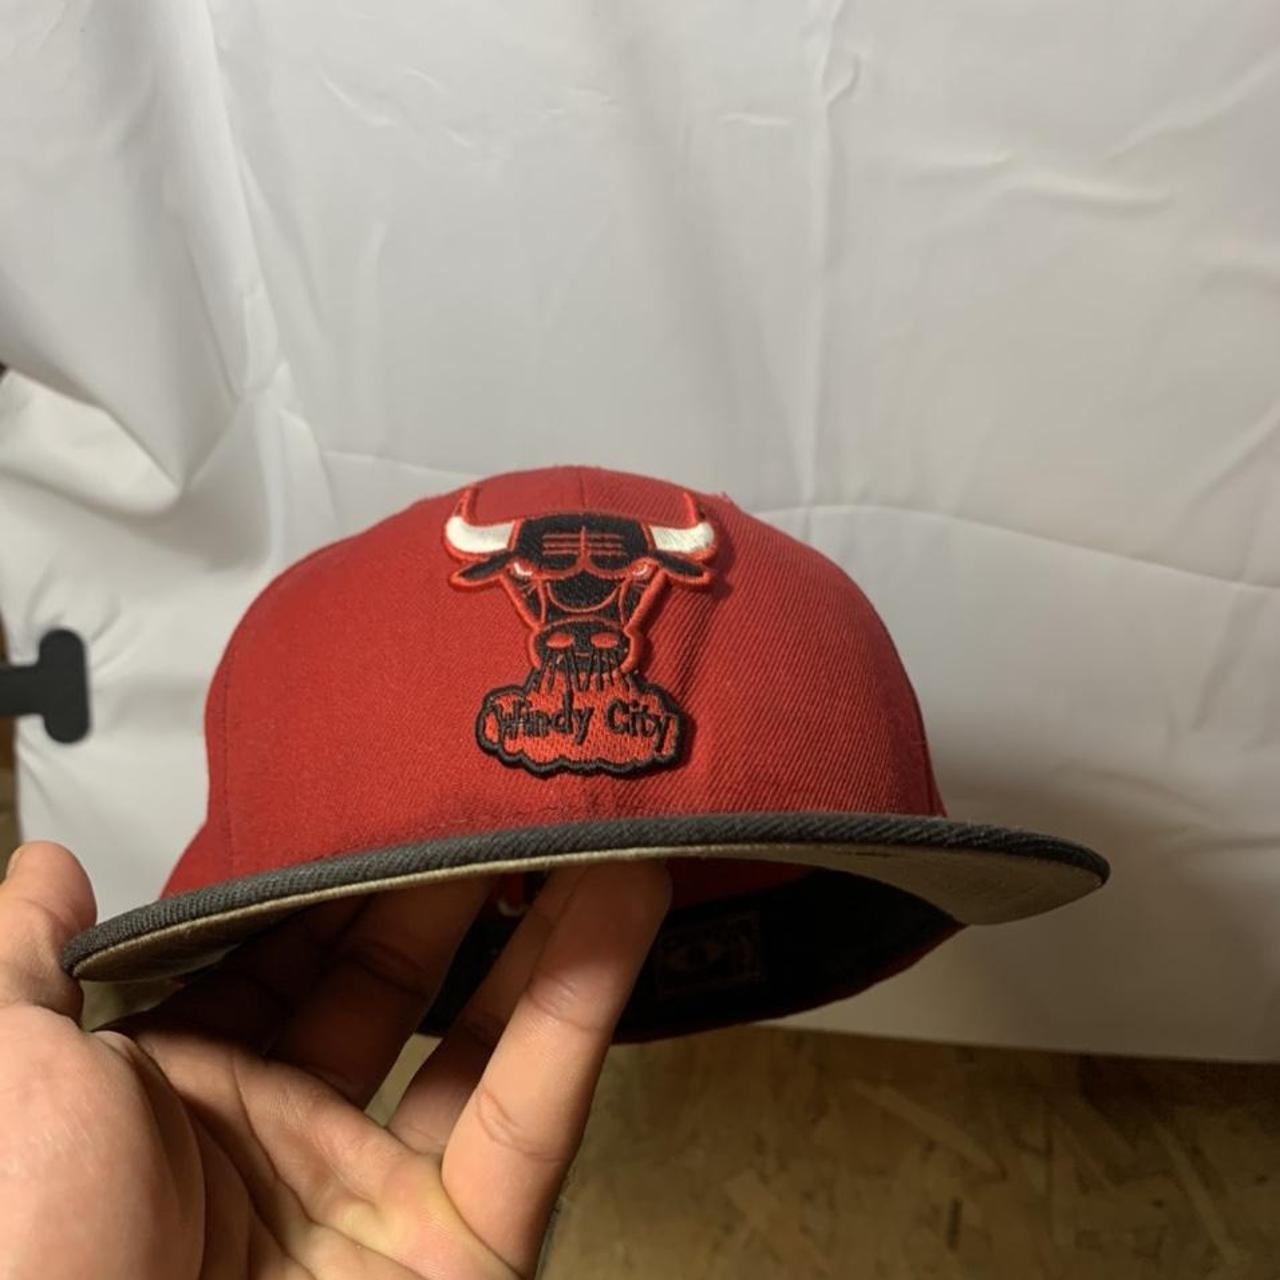 NBA Men's Red and Black Hat